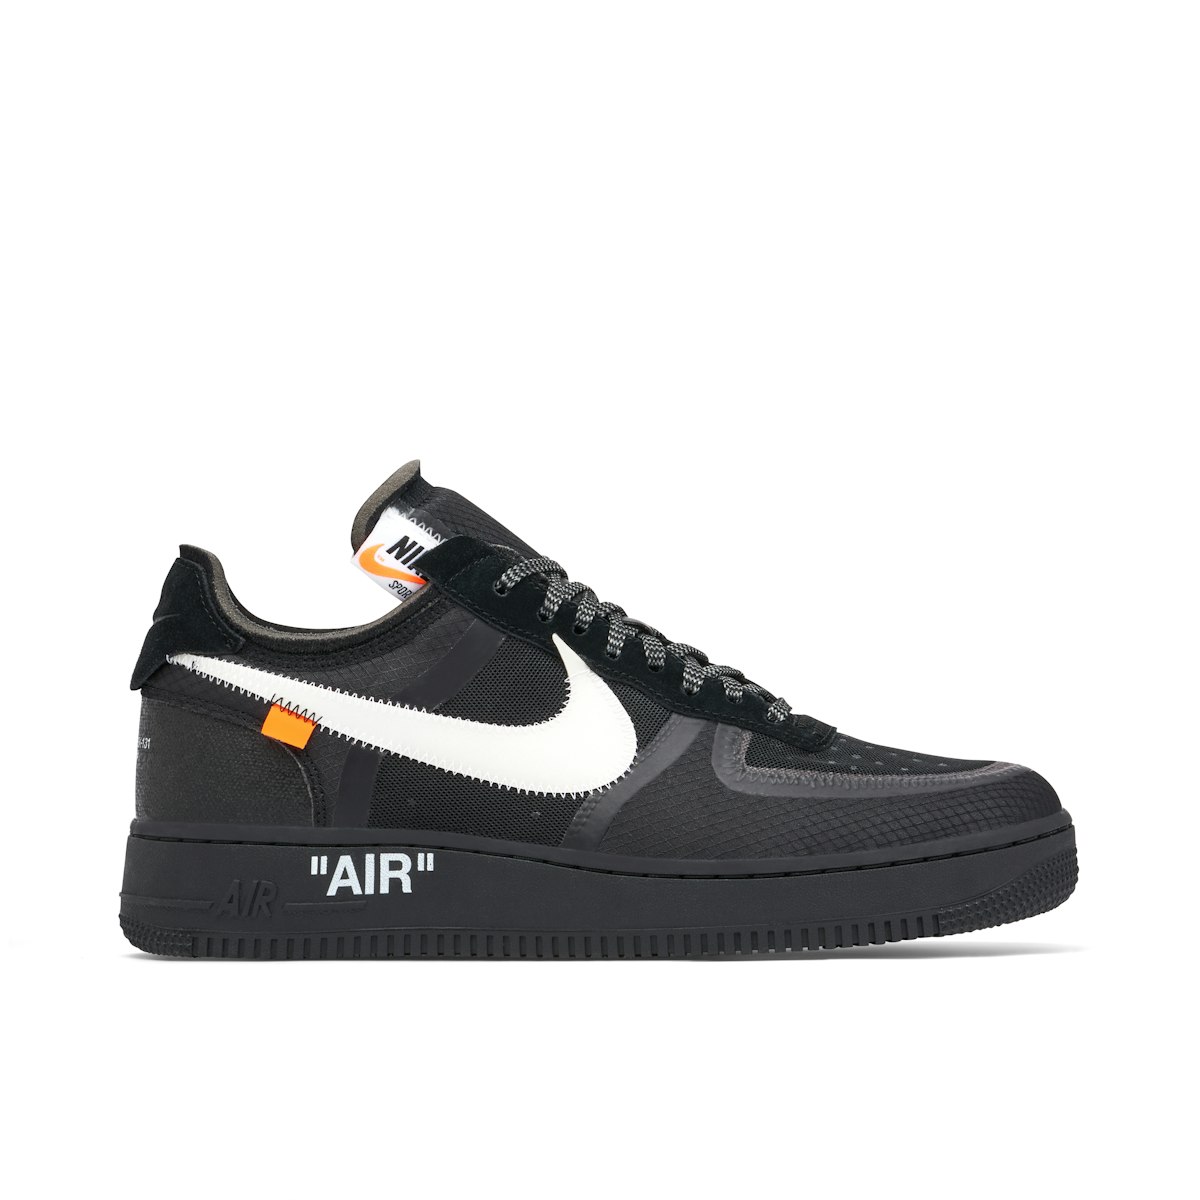 Get The OFF-WHITE x Nike Air Force 1 Low Black This Week •